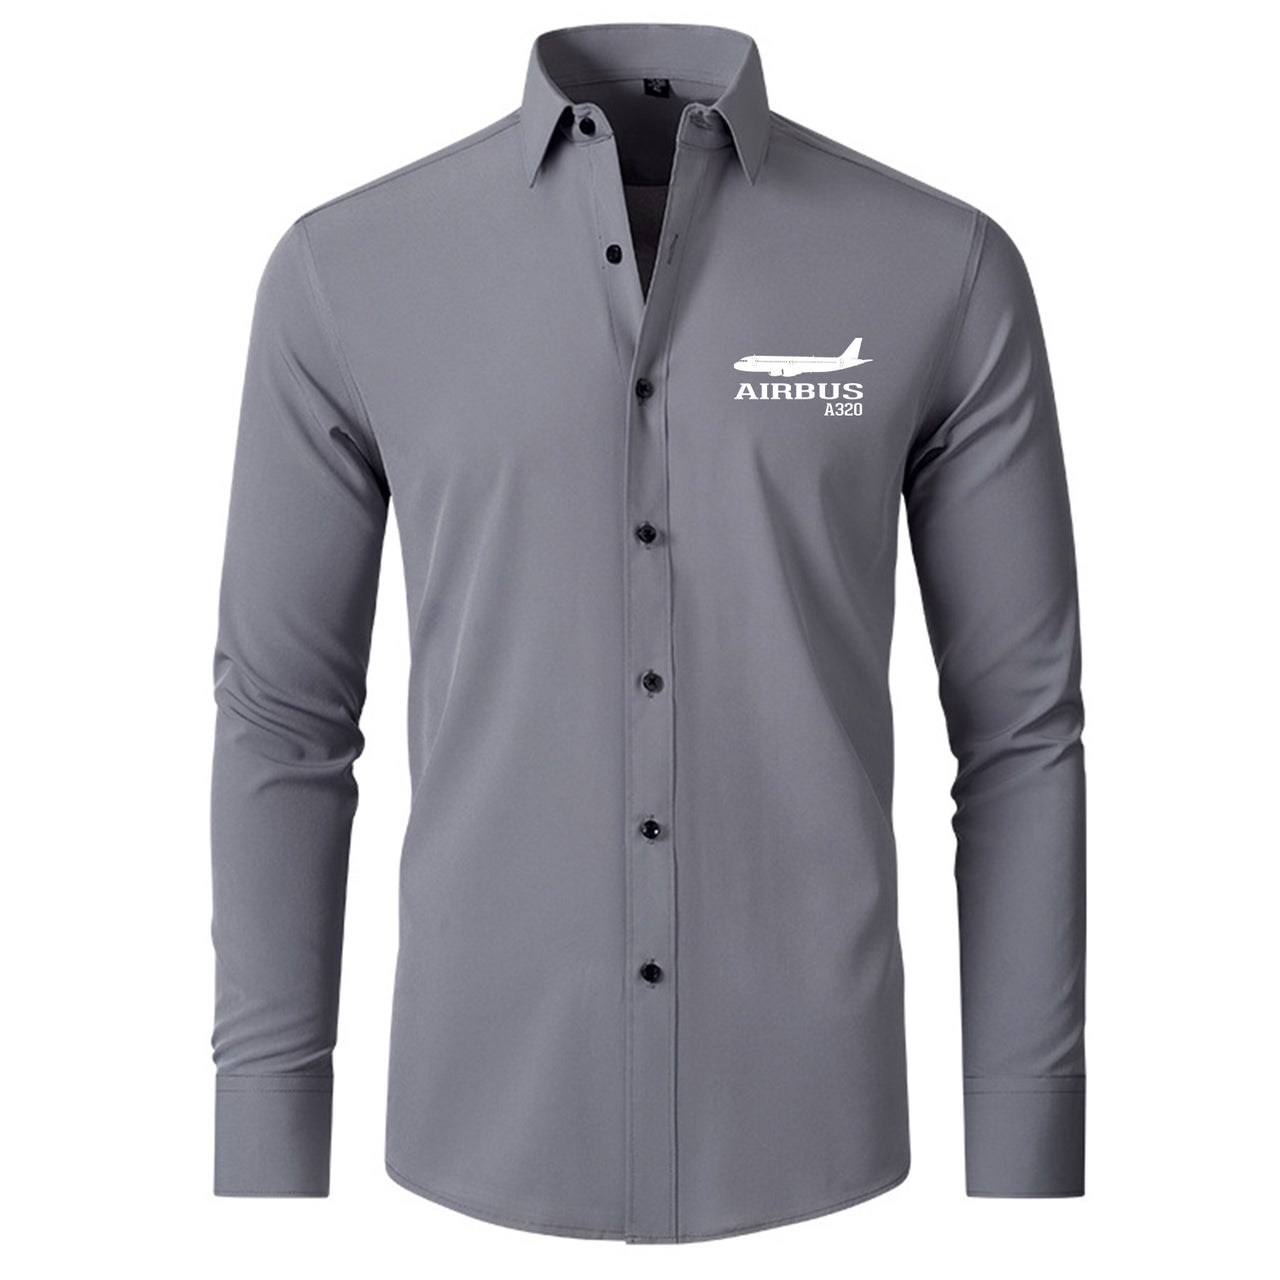 Airbus A320 Printed Designed Long Sleeve Shirts